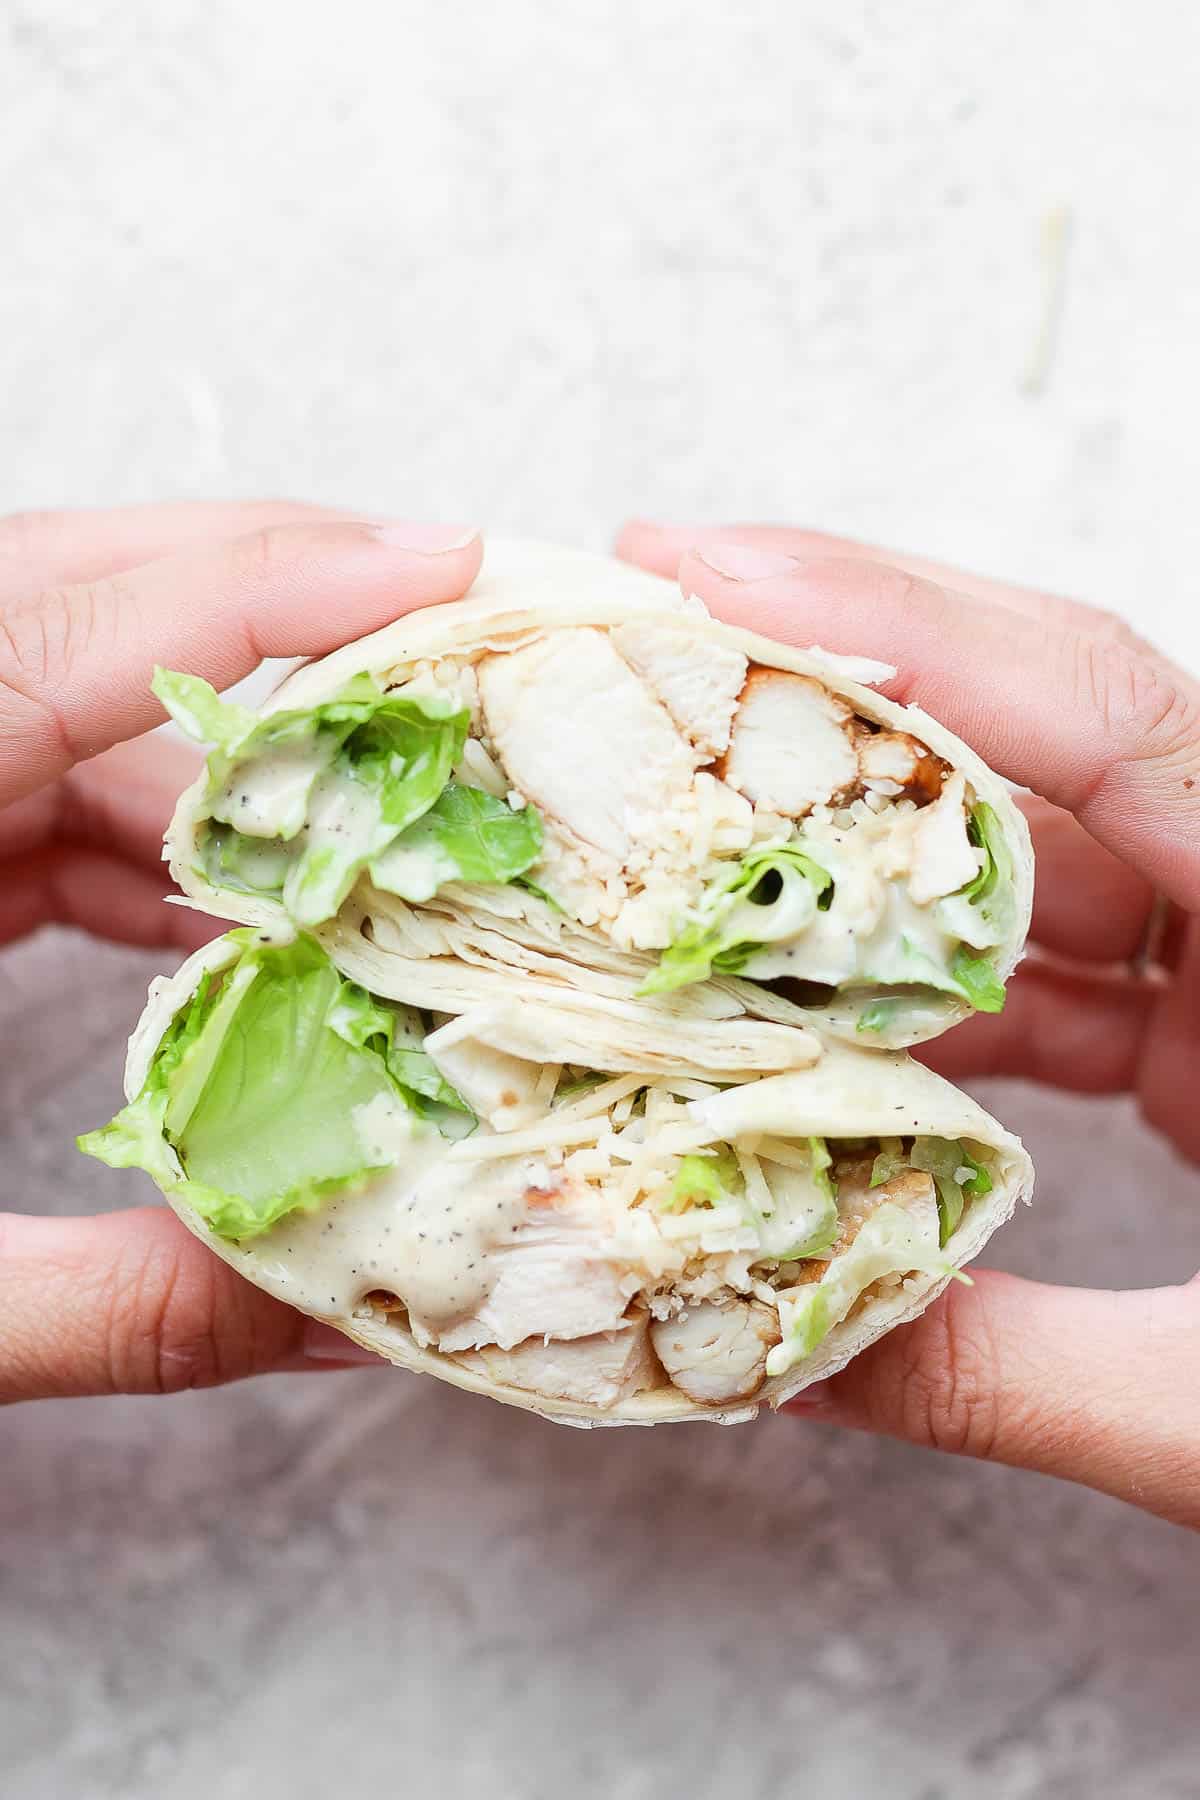 Hands holding a chicken caesar wrap that was cut open in the middle.